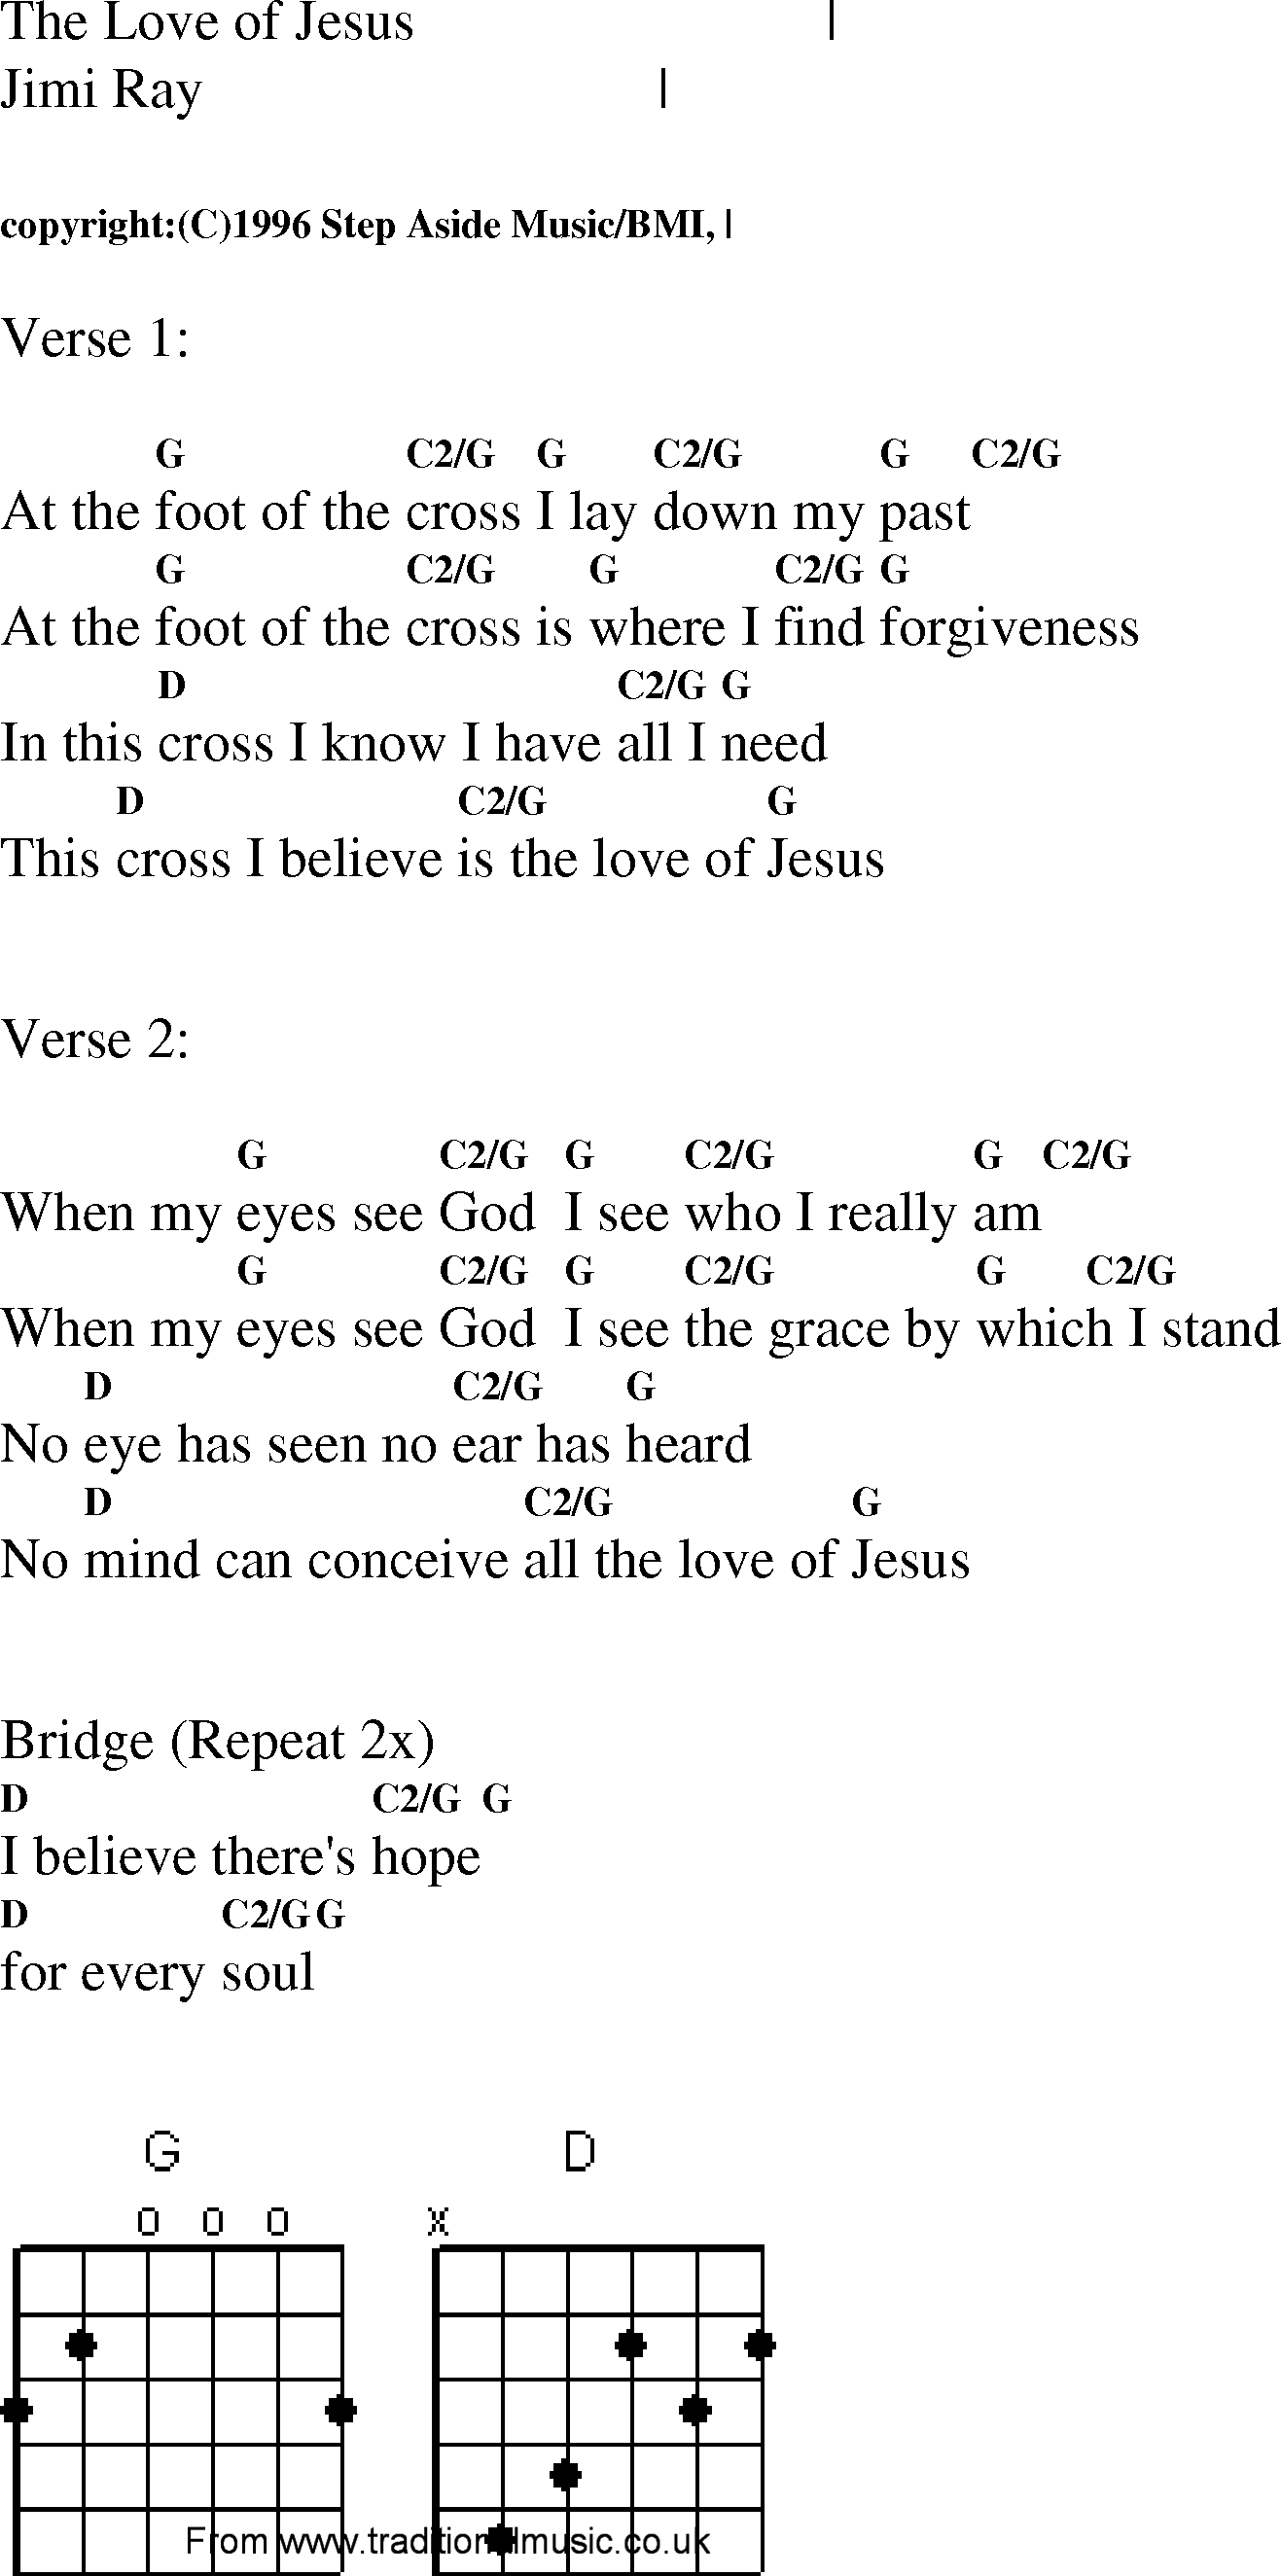 Gospel Song: the_love_of_jesus, lyrics and chords.